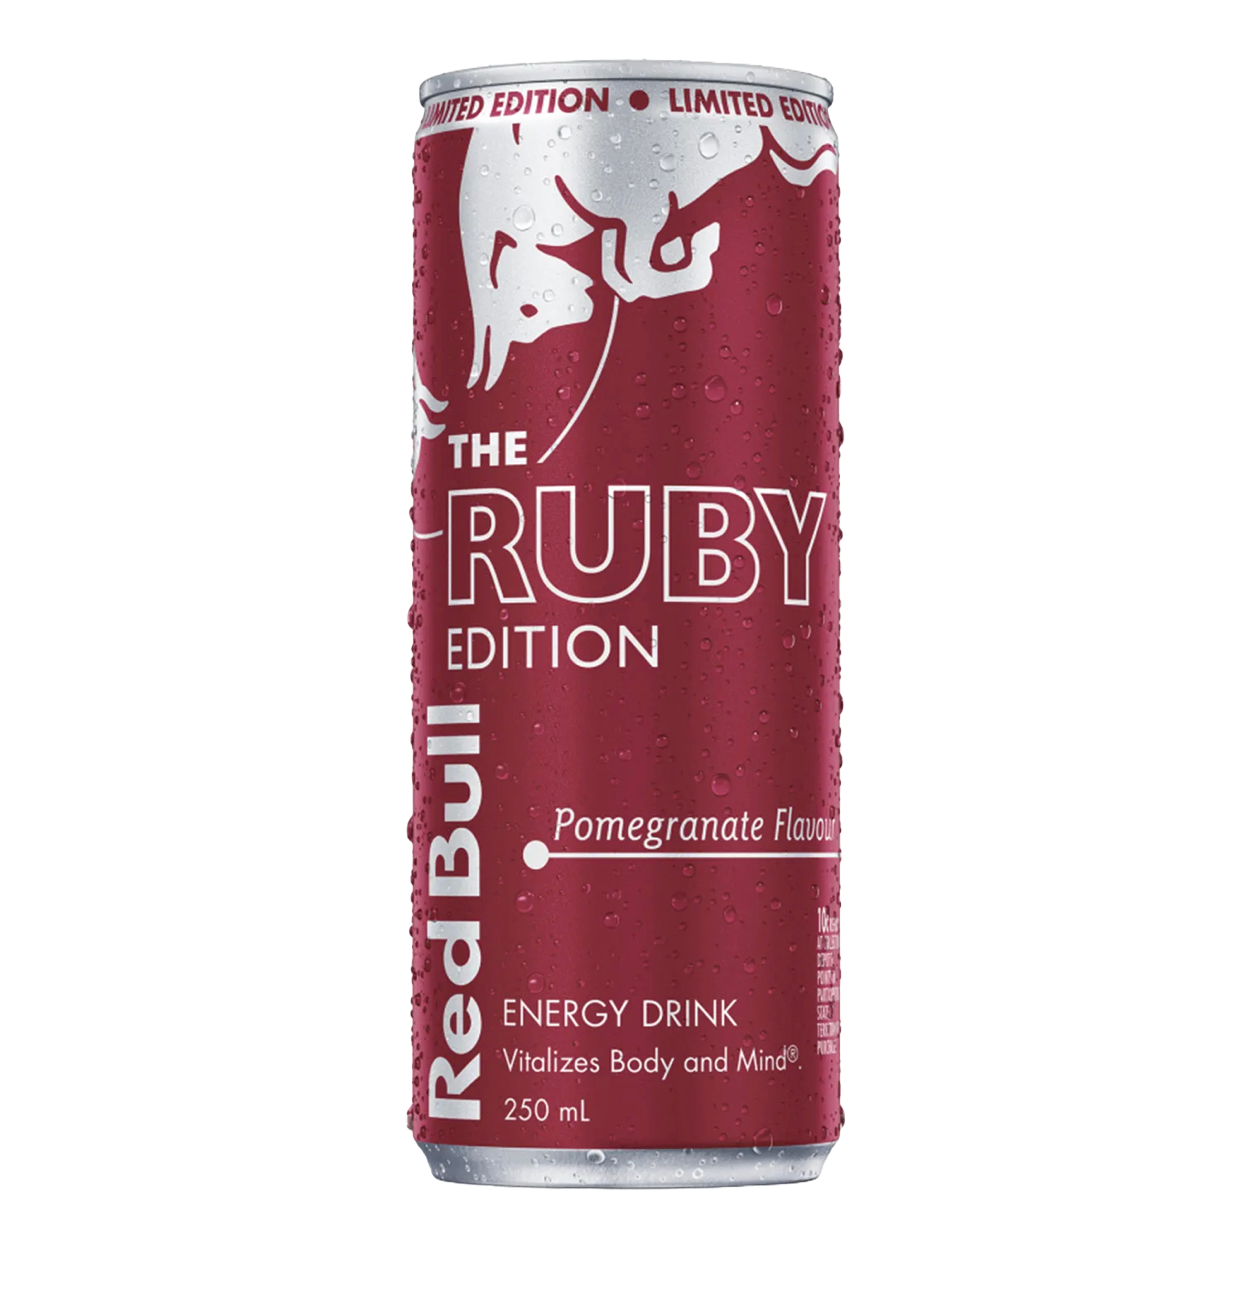 Red Bull Pomegranate The Winter Edition